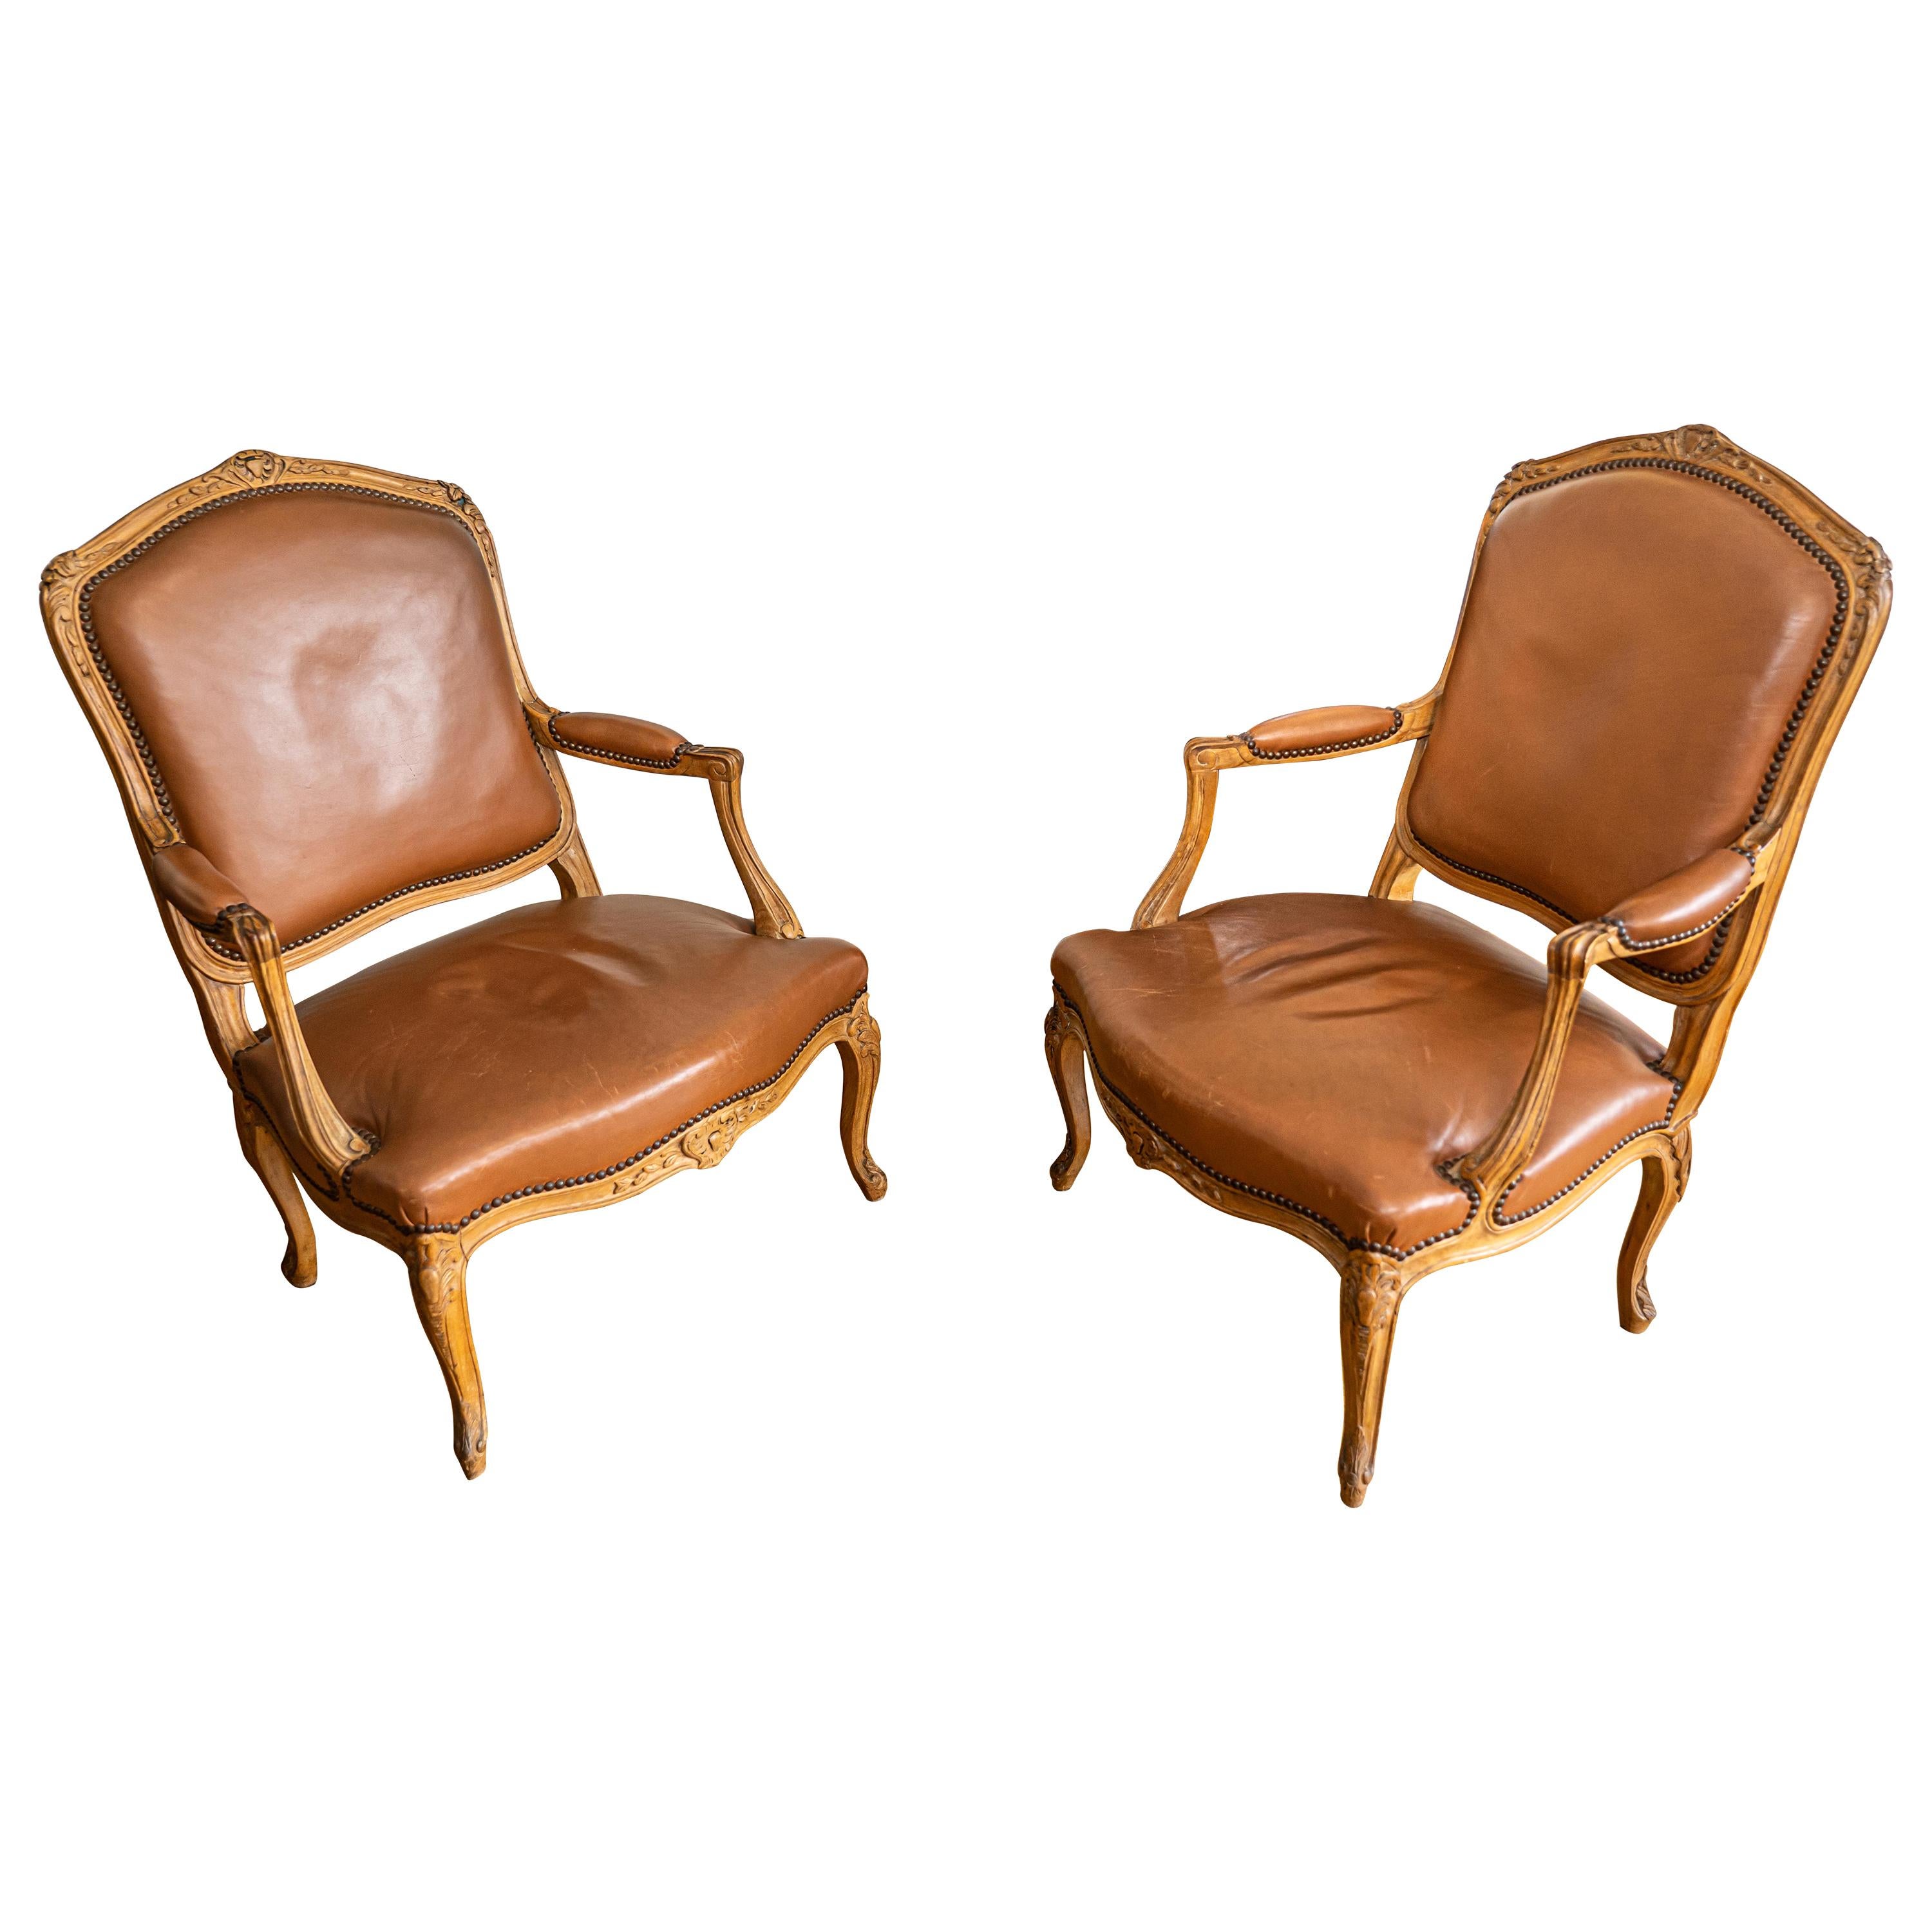 Pair of French Louis XV Style Carved Oakwood and Leather Armchairs